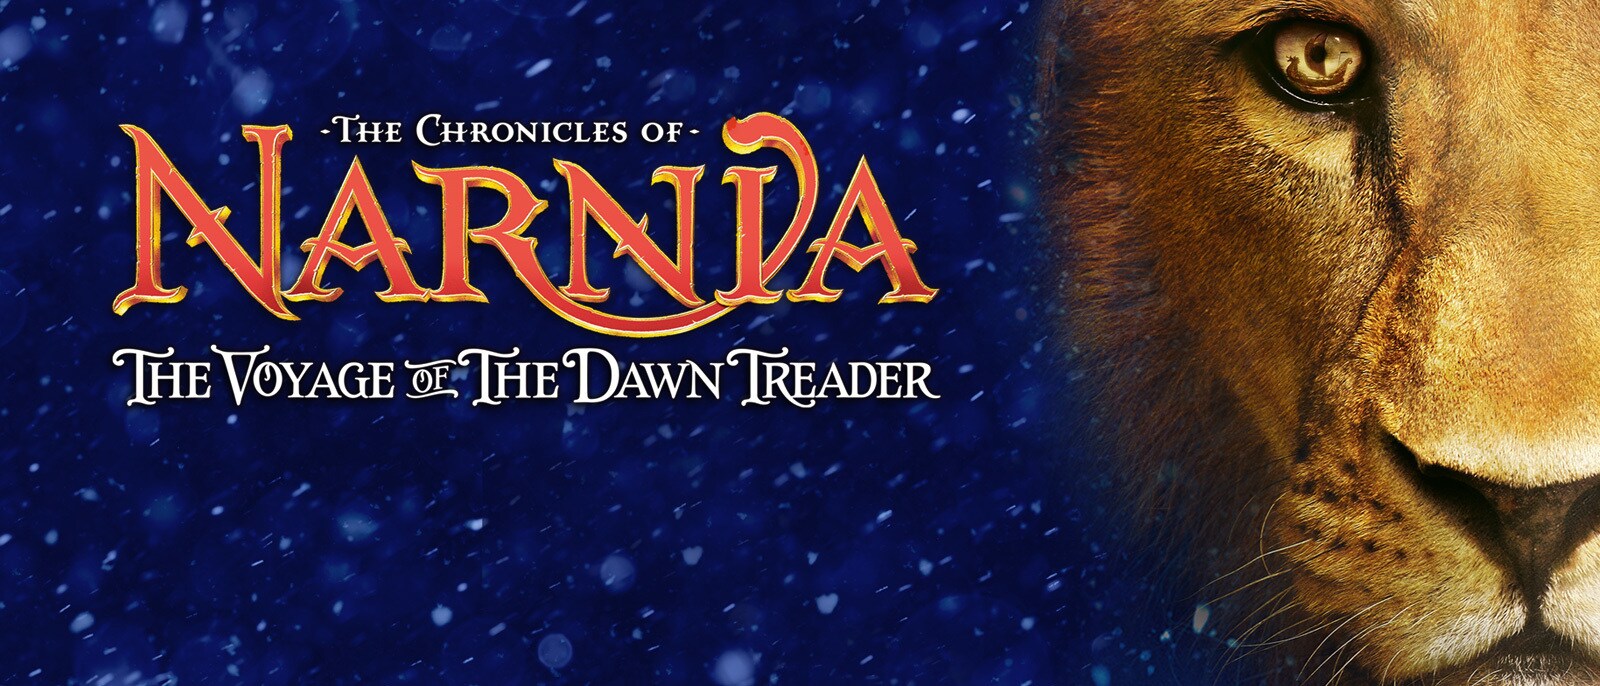 The Chronicles of Narnia: The Voyage of the Dawn Treader Hero